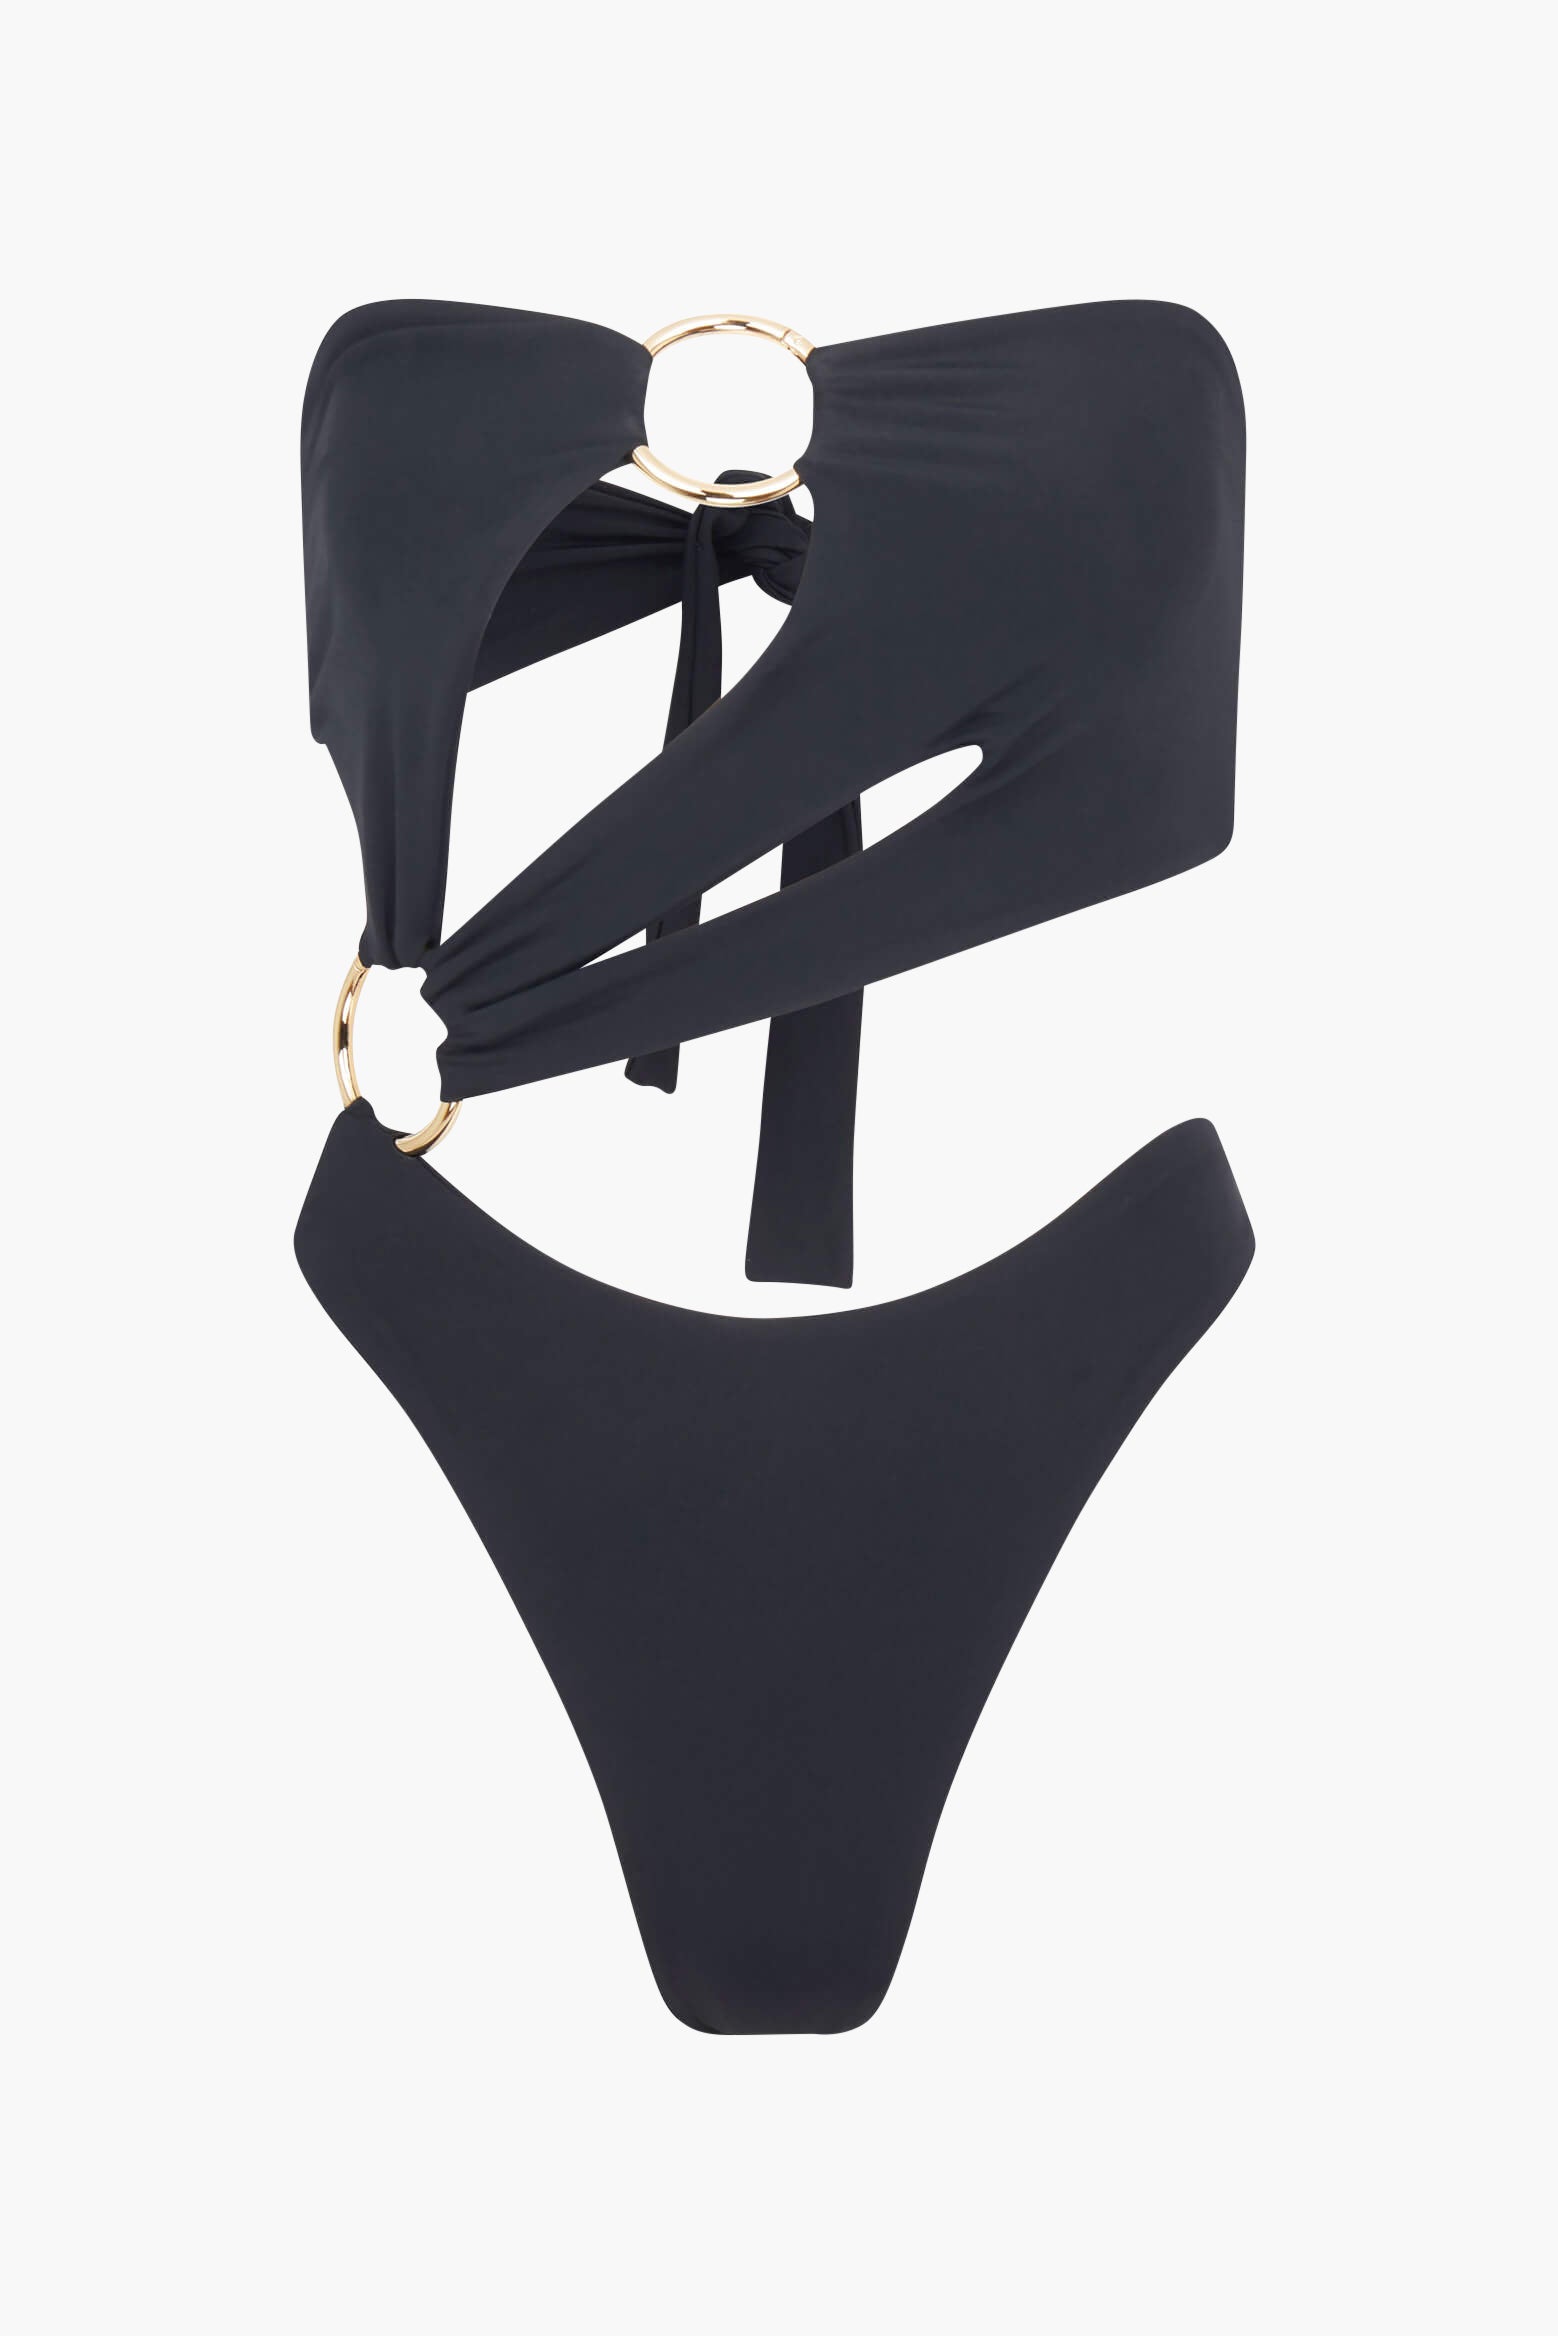 Louisa Ballou Strapless Sex Wax Swimsuit in Black available at TNT The New Trend Australia.